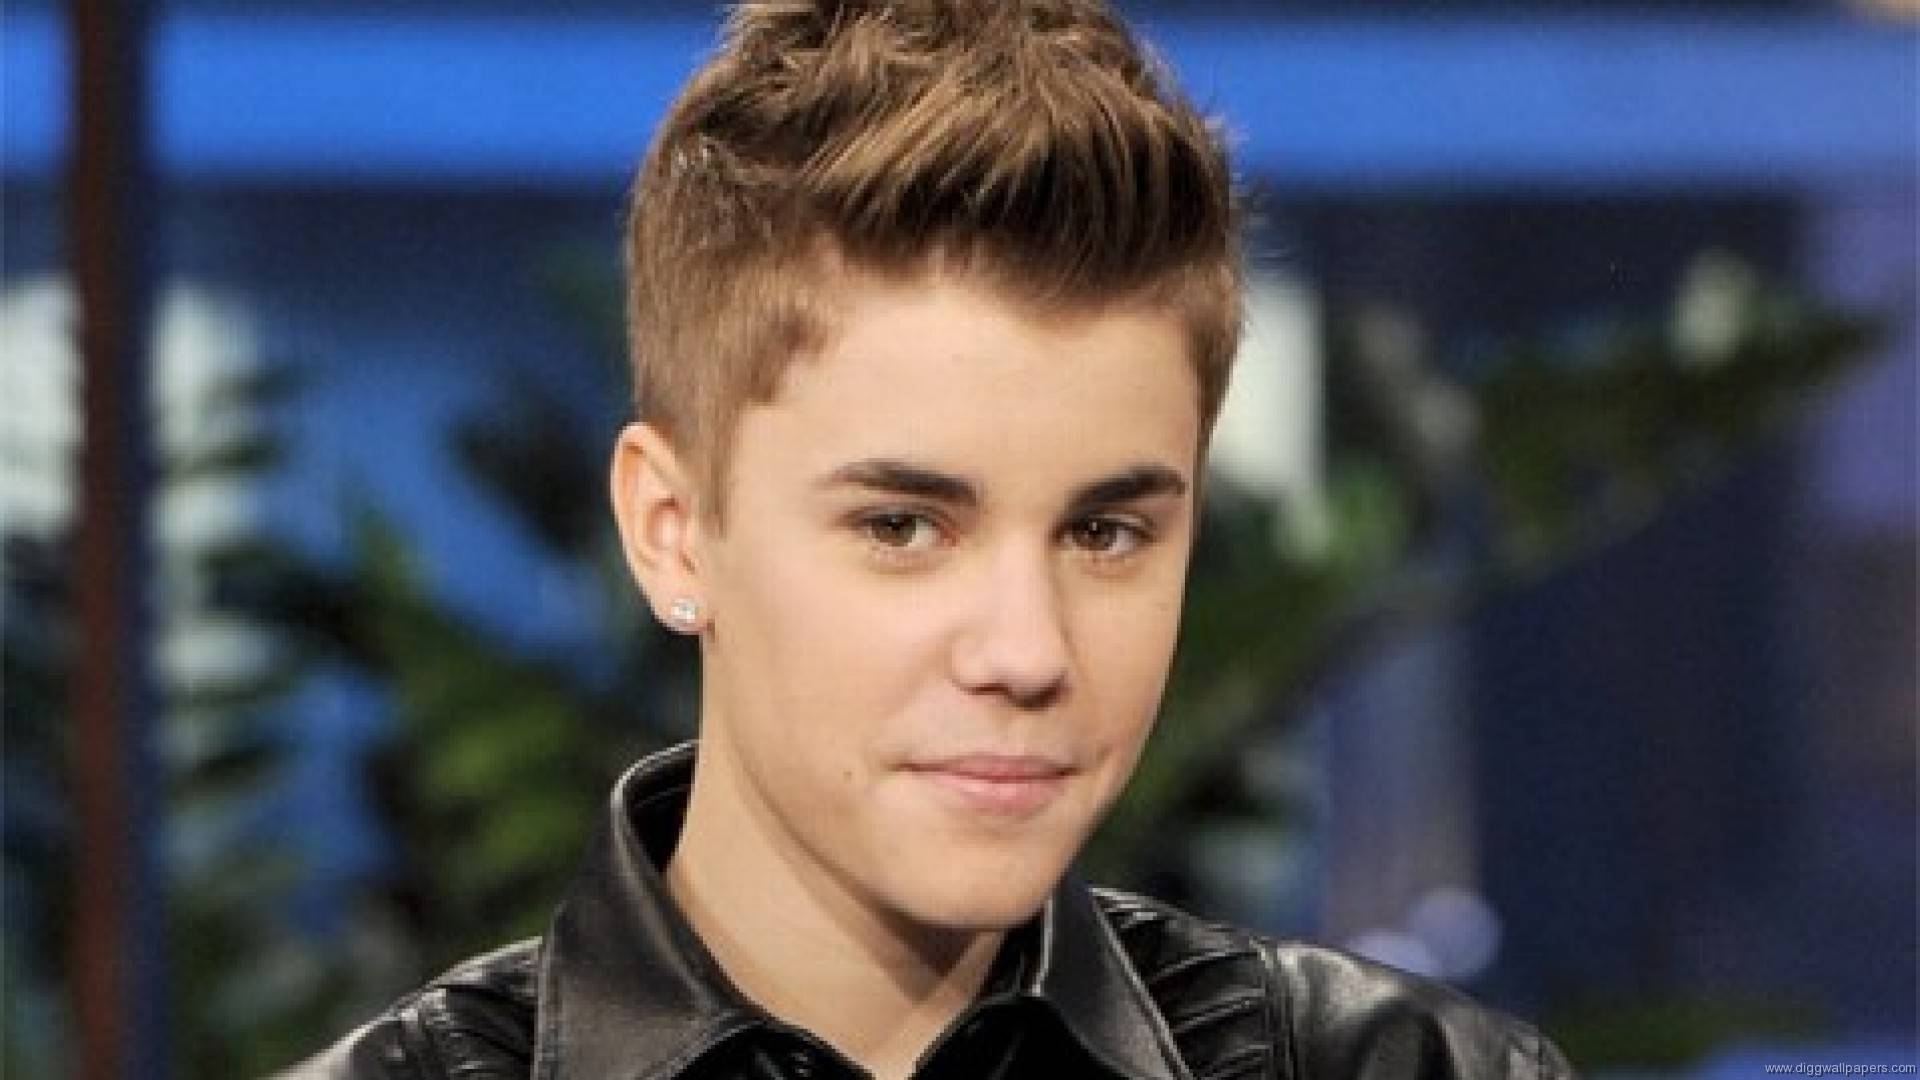 New haircut style of Justin Bieber 2015   Face Wallpapers